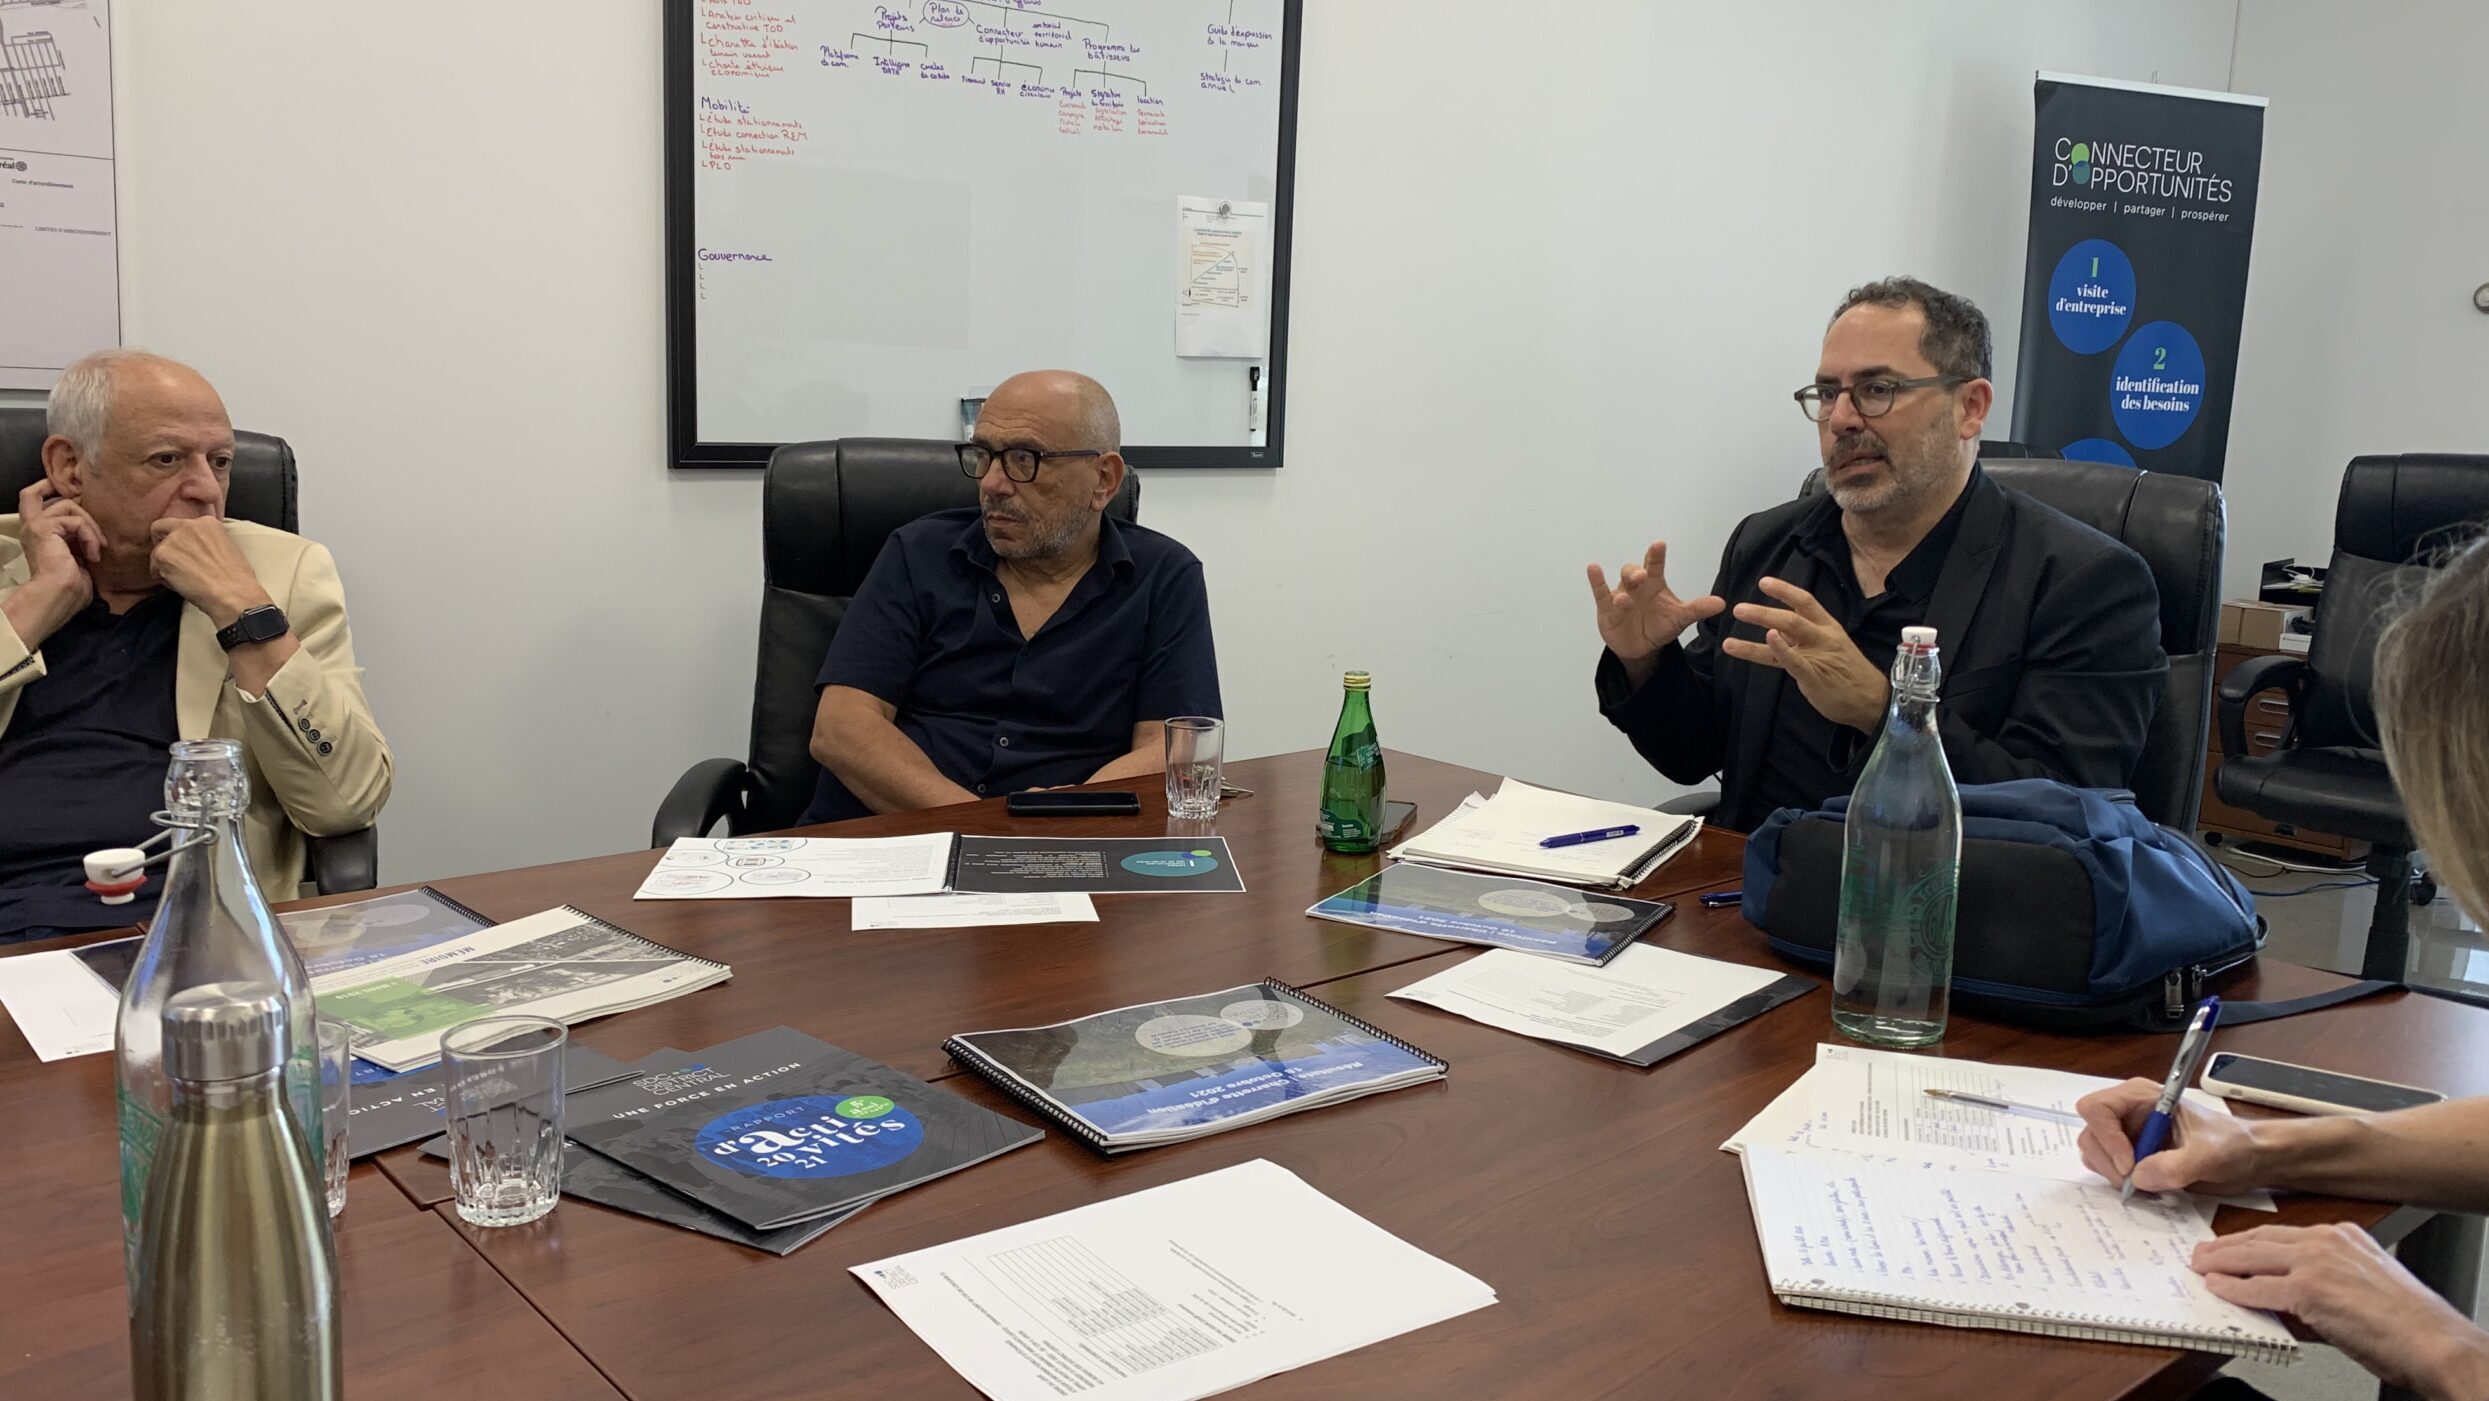 Builders’ Committee workshop with Eyal Cohen
(Marcarko-555 Chabanel), Albert Ezer (Dayan Group)
and Emmanuel Amar (for AEDN Realty) - July 13